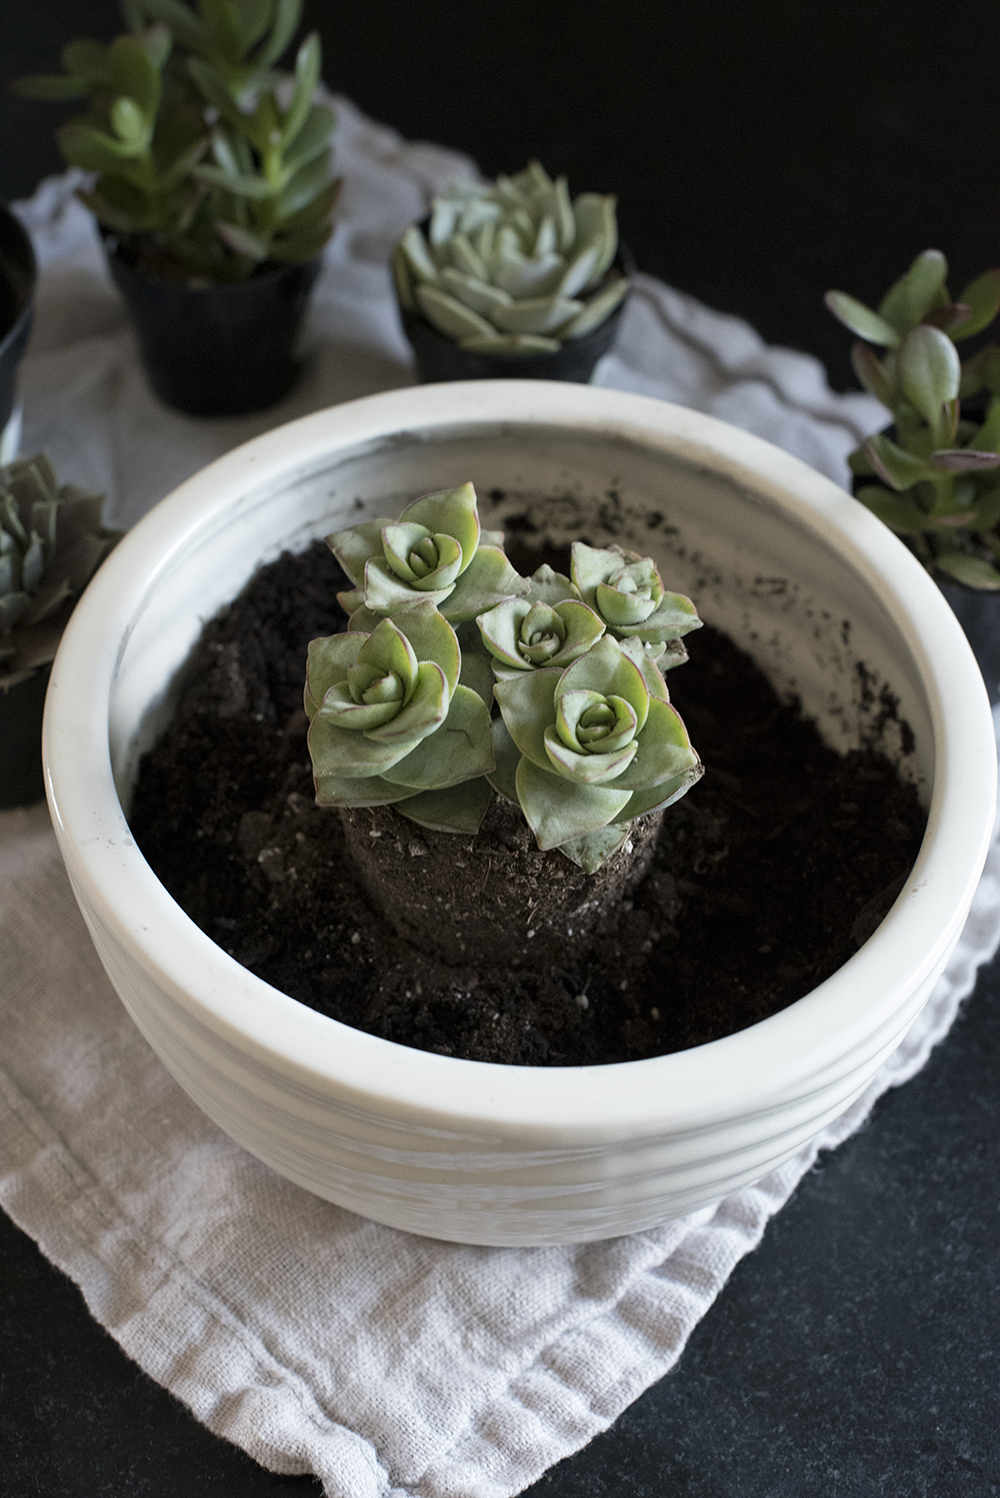 Repurposing a Candle Into A Succulent Planter - roomfortuesday.com